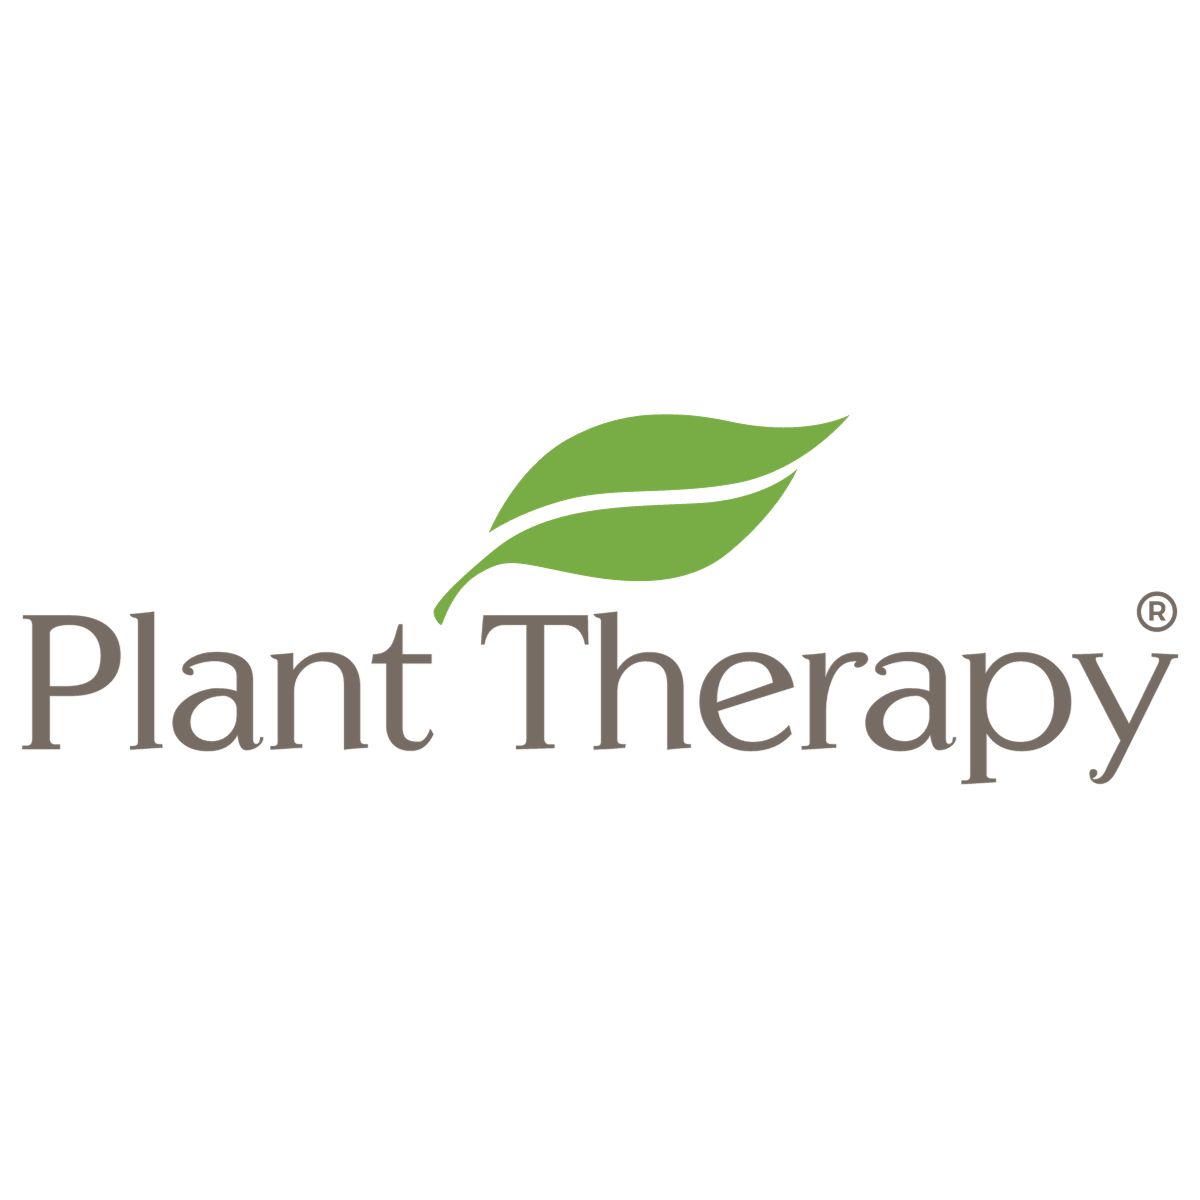 Plant Therapy